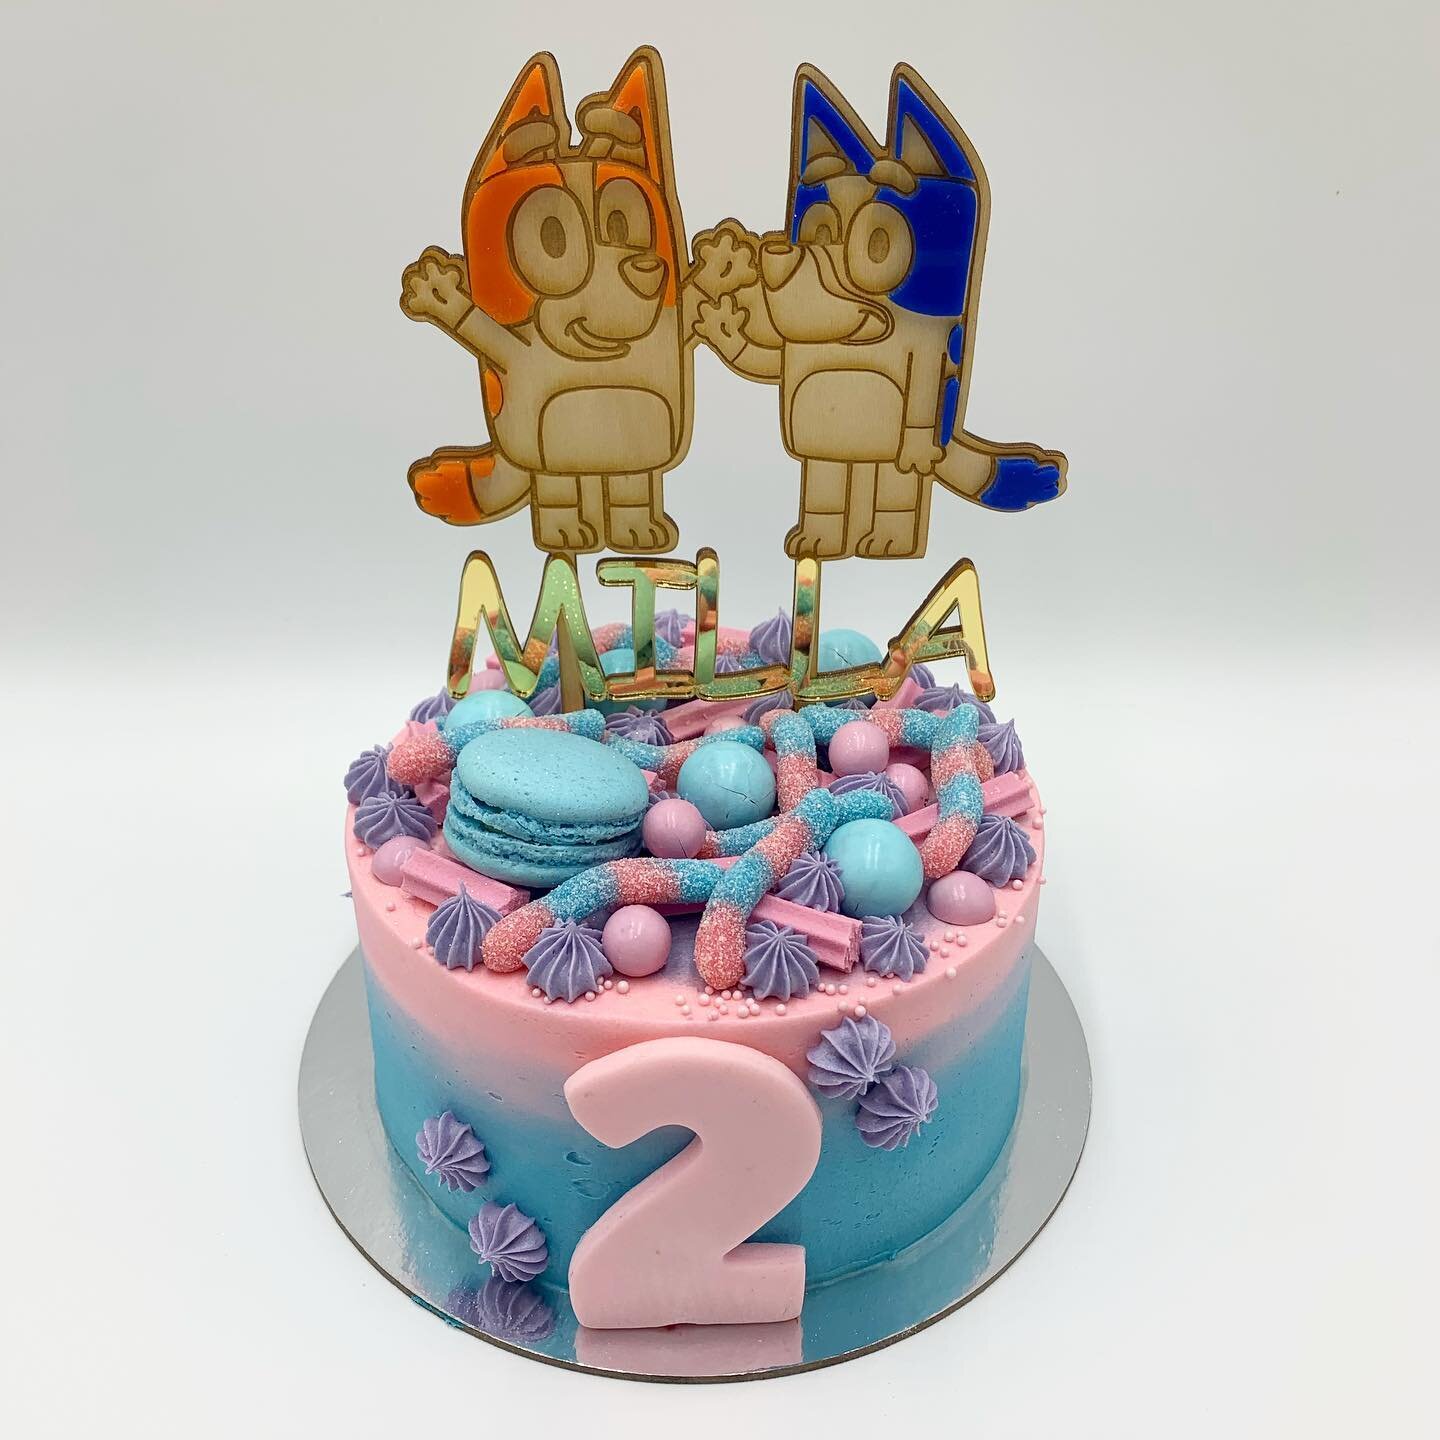 How cute! 🤍 love the colour scheme of the cake - could easily be matched with a pink and blue bluey topper and I think it would look absolutely stunning!!! ✨✨ Bluey is such a popular theme lately - I might have to watch an ep or 2 haha